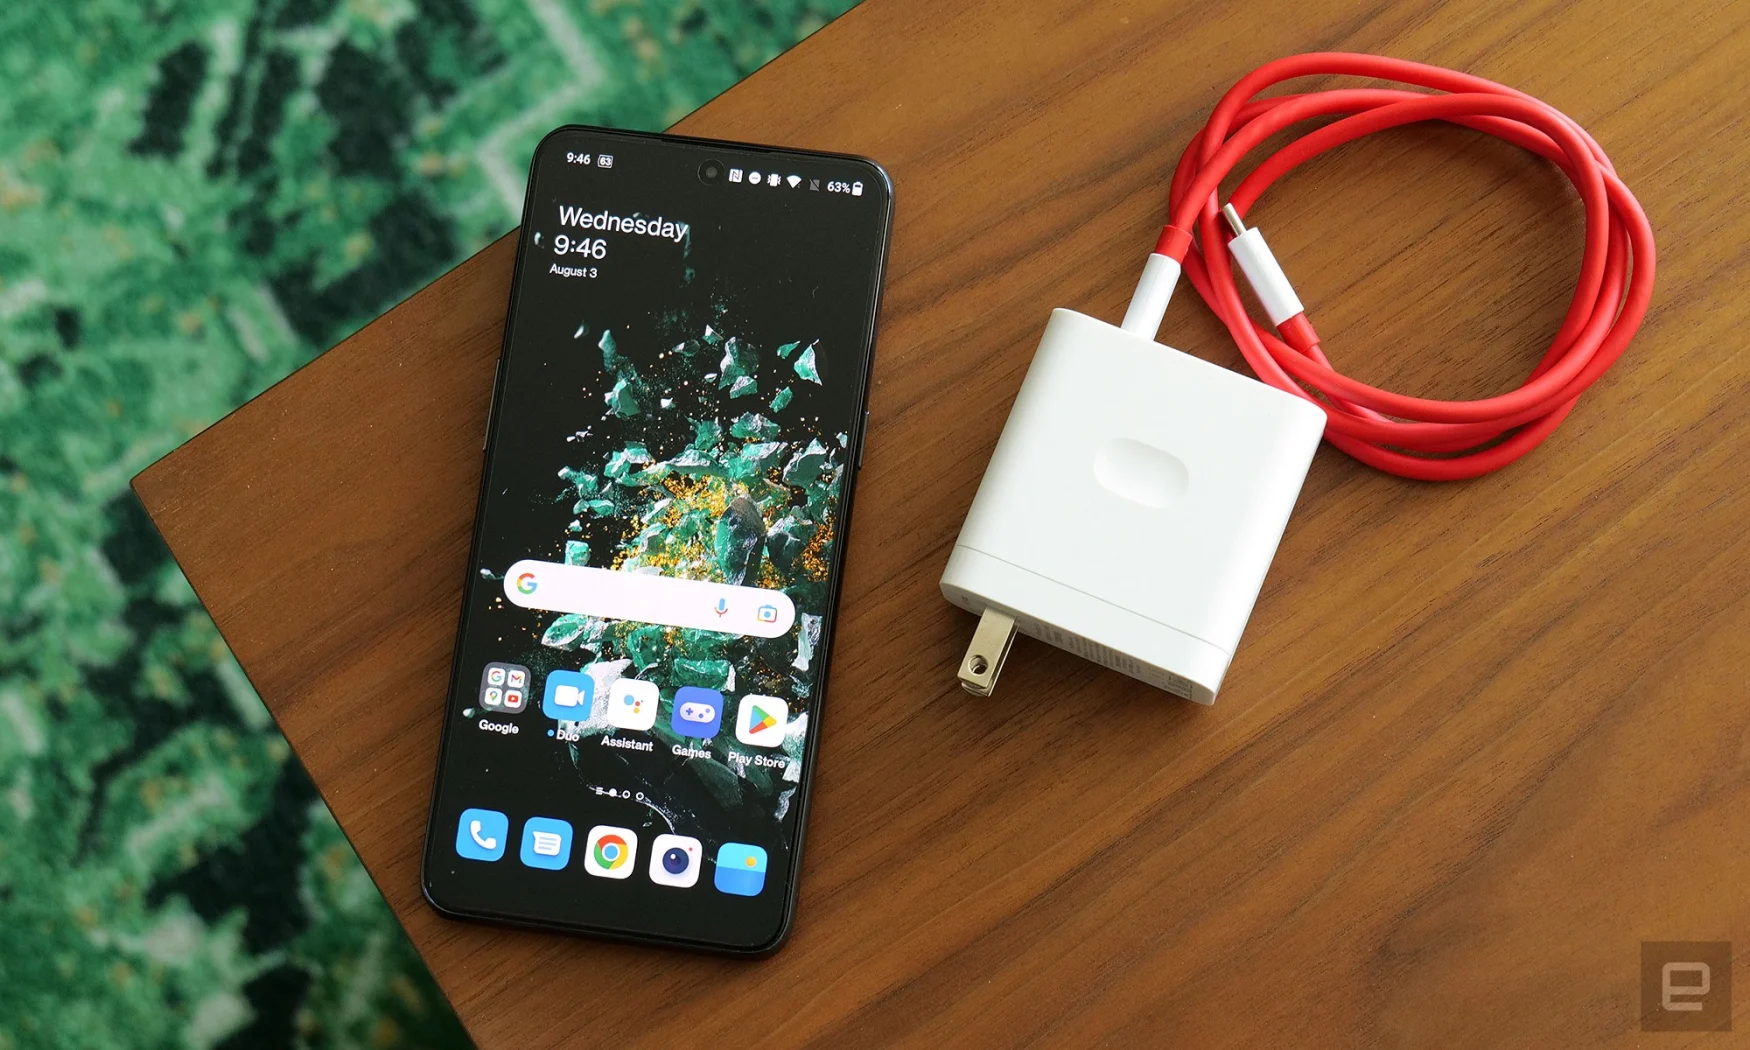 Unlike a lot of other phones nowadays, the OnePlus' super fast charging brick comes included.